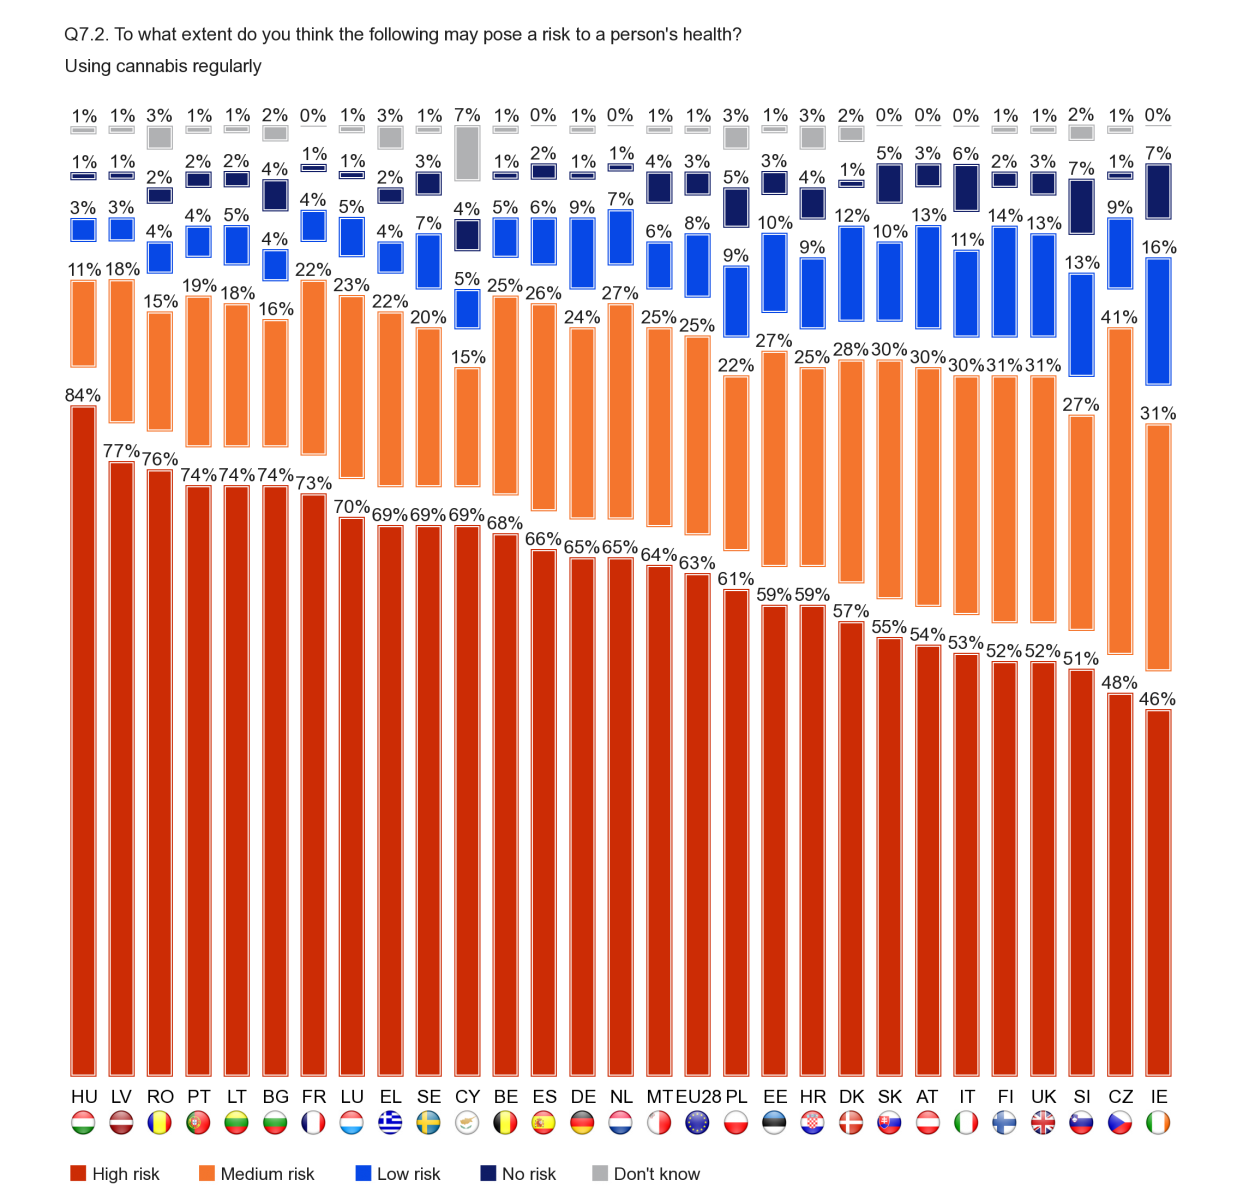 FLASH EUROBAROMETER The picture is quite different for regular cannabis use, with at least half the respondents in all but two countries saying this may pose a high risk to health.